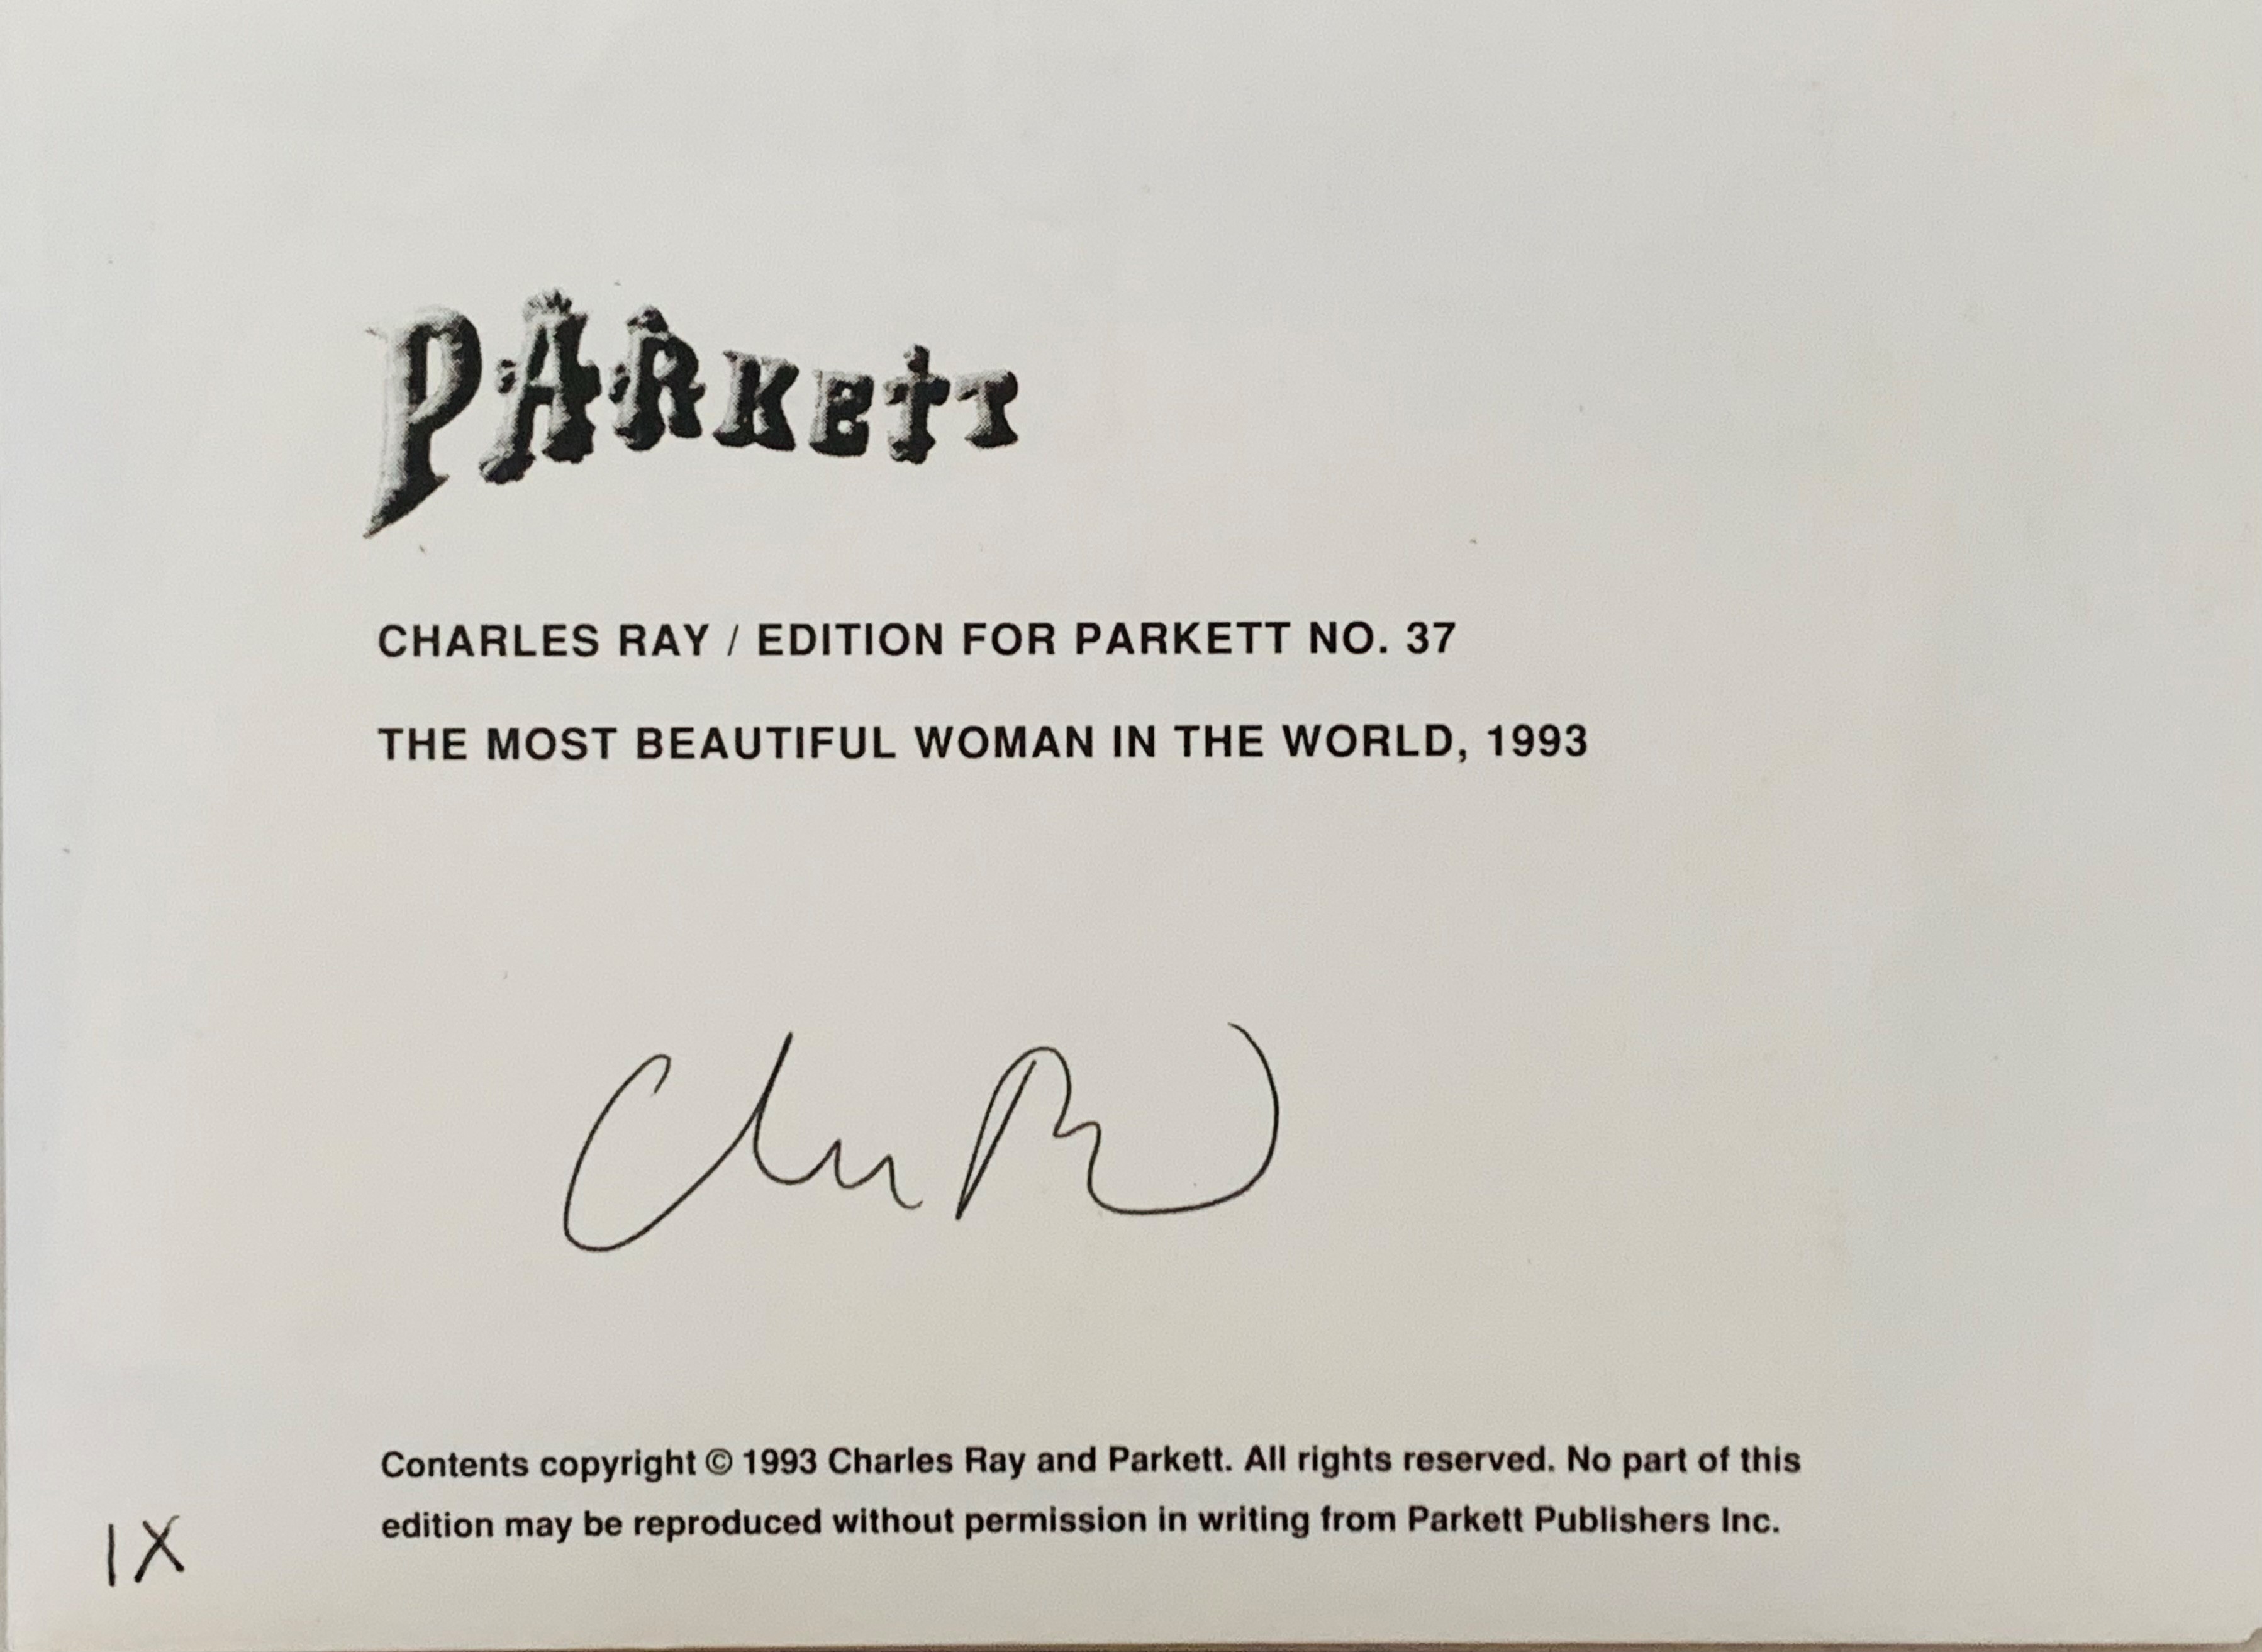 (RAY, CHARLES) (PARKETT). Ray, Charles. Curiger, Bice, Editor - PARKETT NO. 37: CHARLES RAY, FRANZ WEST - COLLABORATIONS + EDITIONS: PIPILOTTI RIST - INSERT - FROM CHARLES RAY'S SIGNED, LIMITED ARTIST EDITION WITH NINE ORIGINAL PHOTOGRAPHS